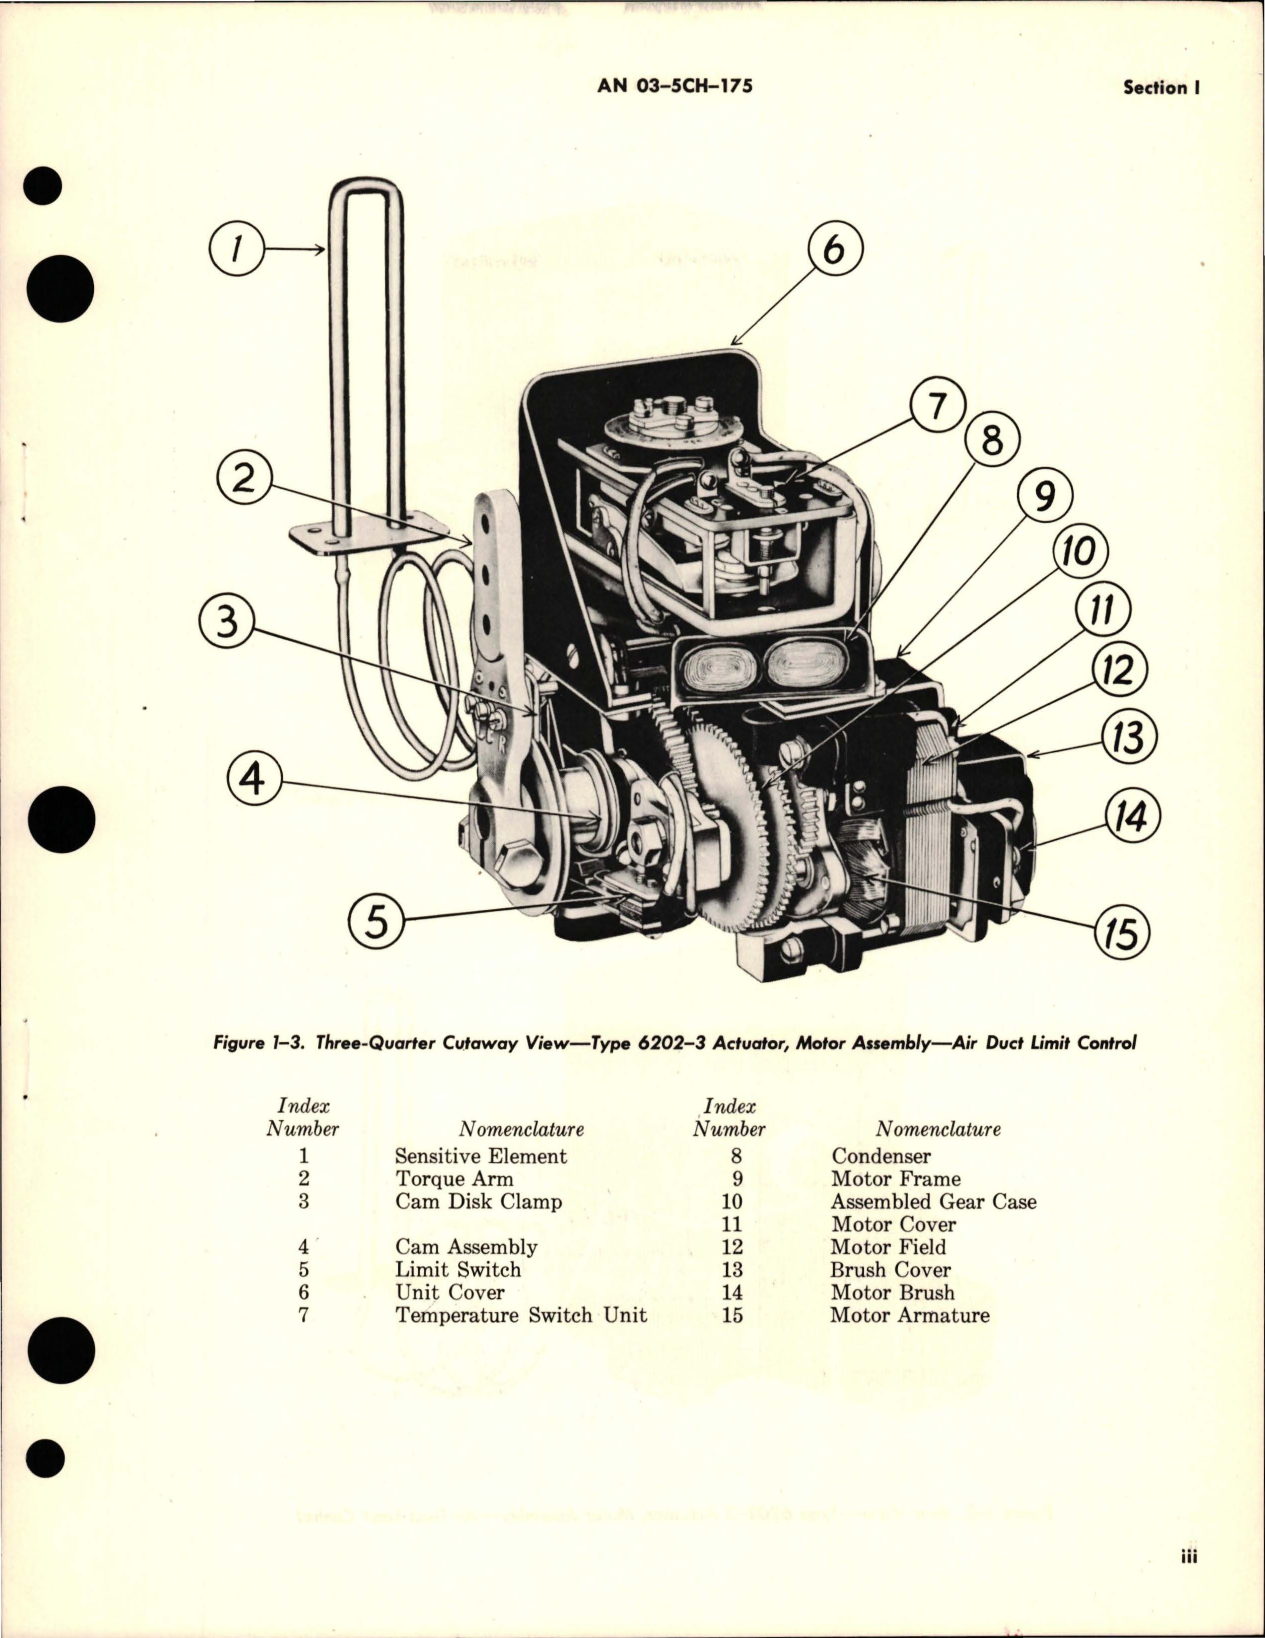 Sample page 5 from AirCorps Library document: Overhaul Instructions for Motor Assembly Air Duct Limit Control Actuator - Type 6202-3